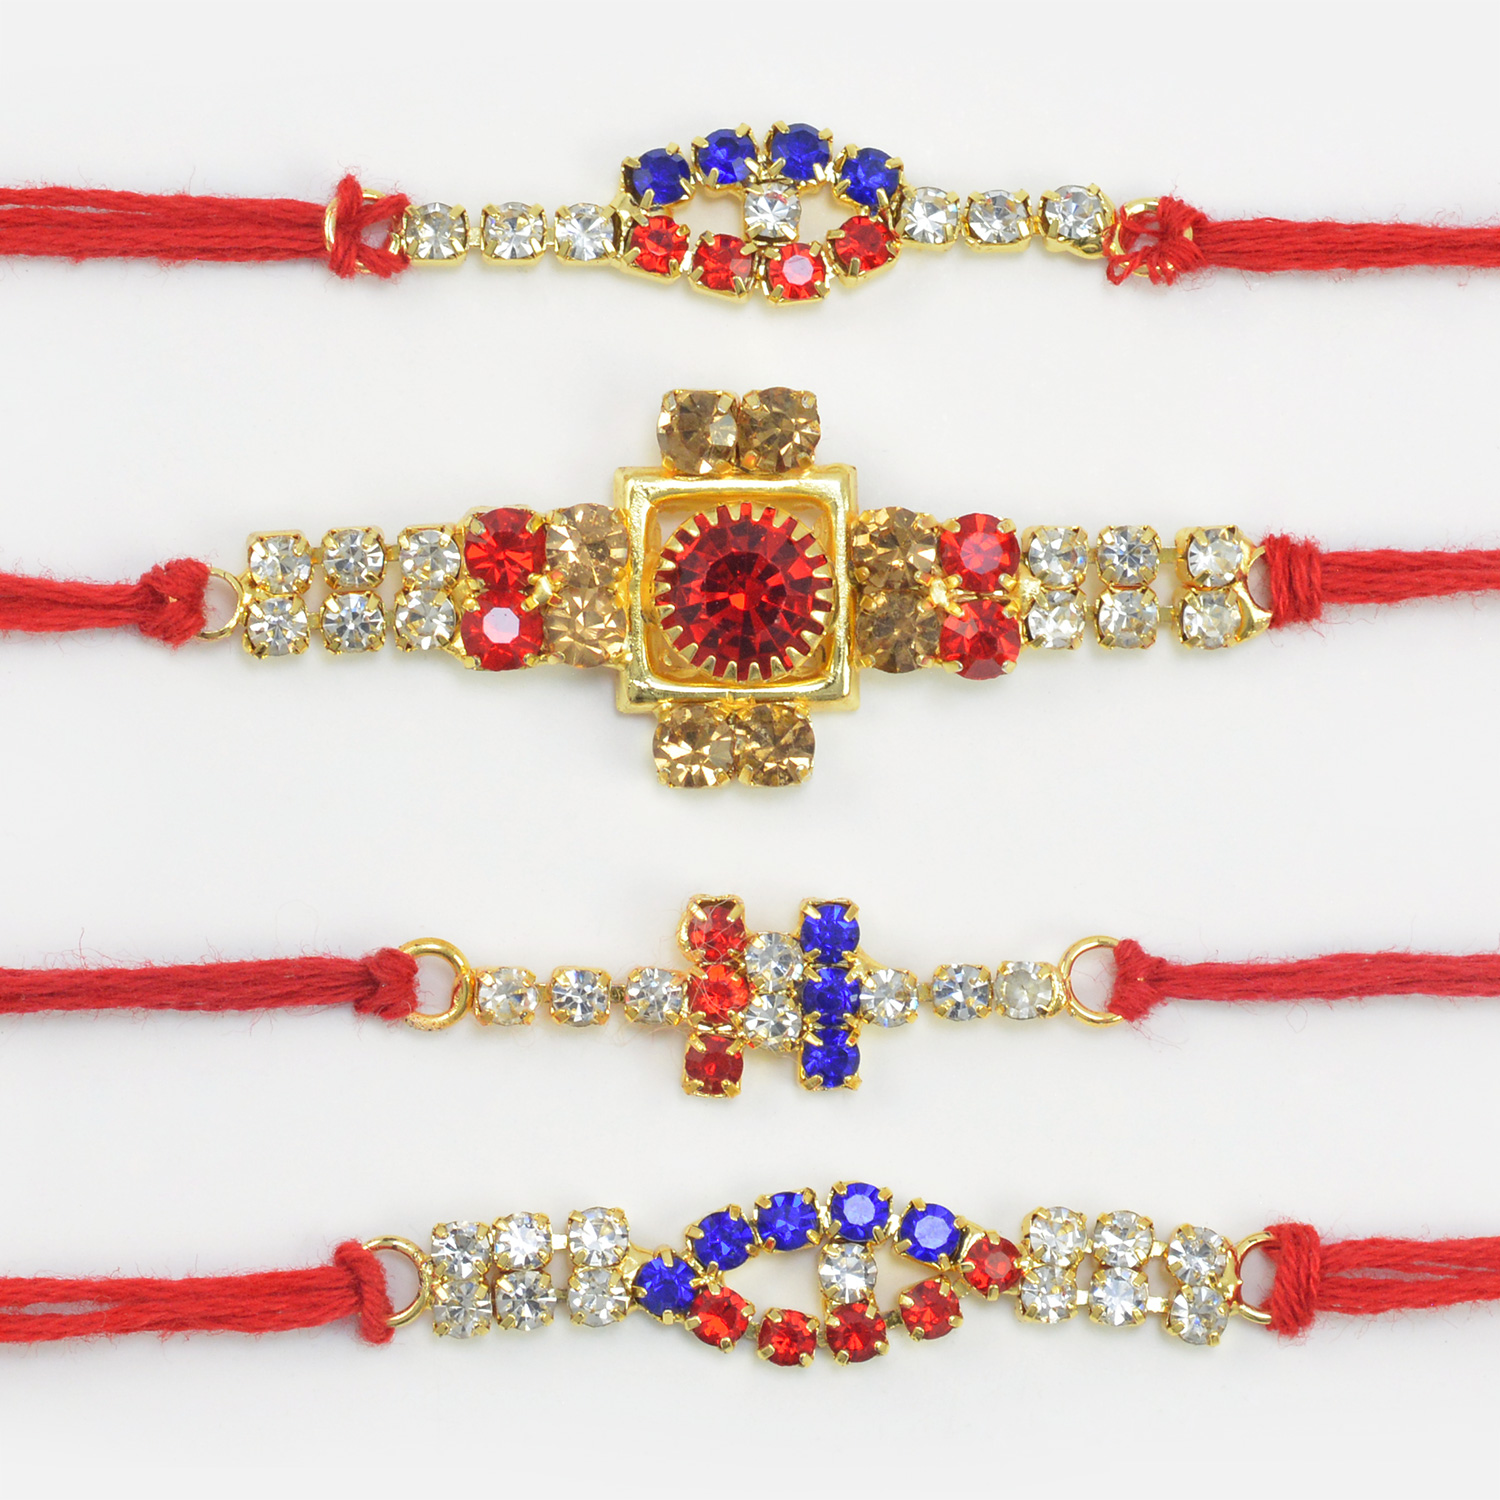 Red Blue and Black Diamond Stones Studded Stunning Rakhis Set for 4 Brothers